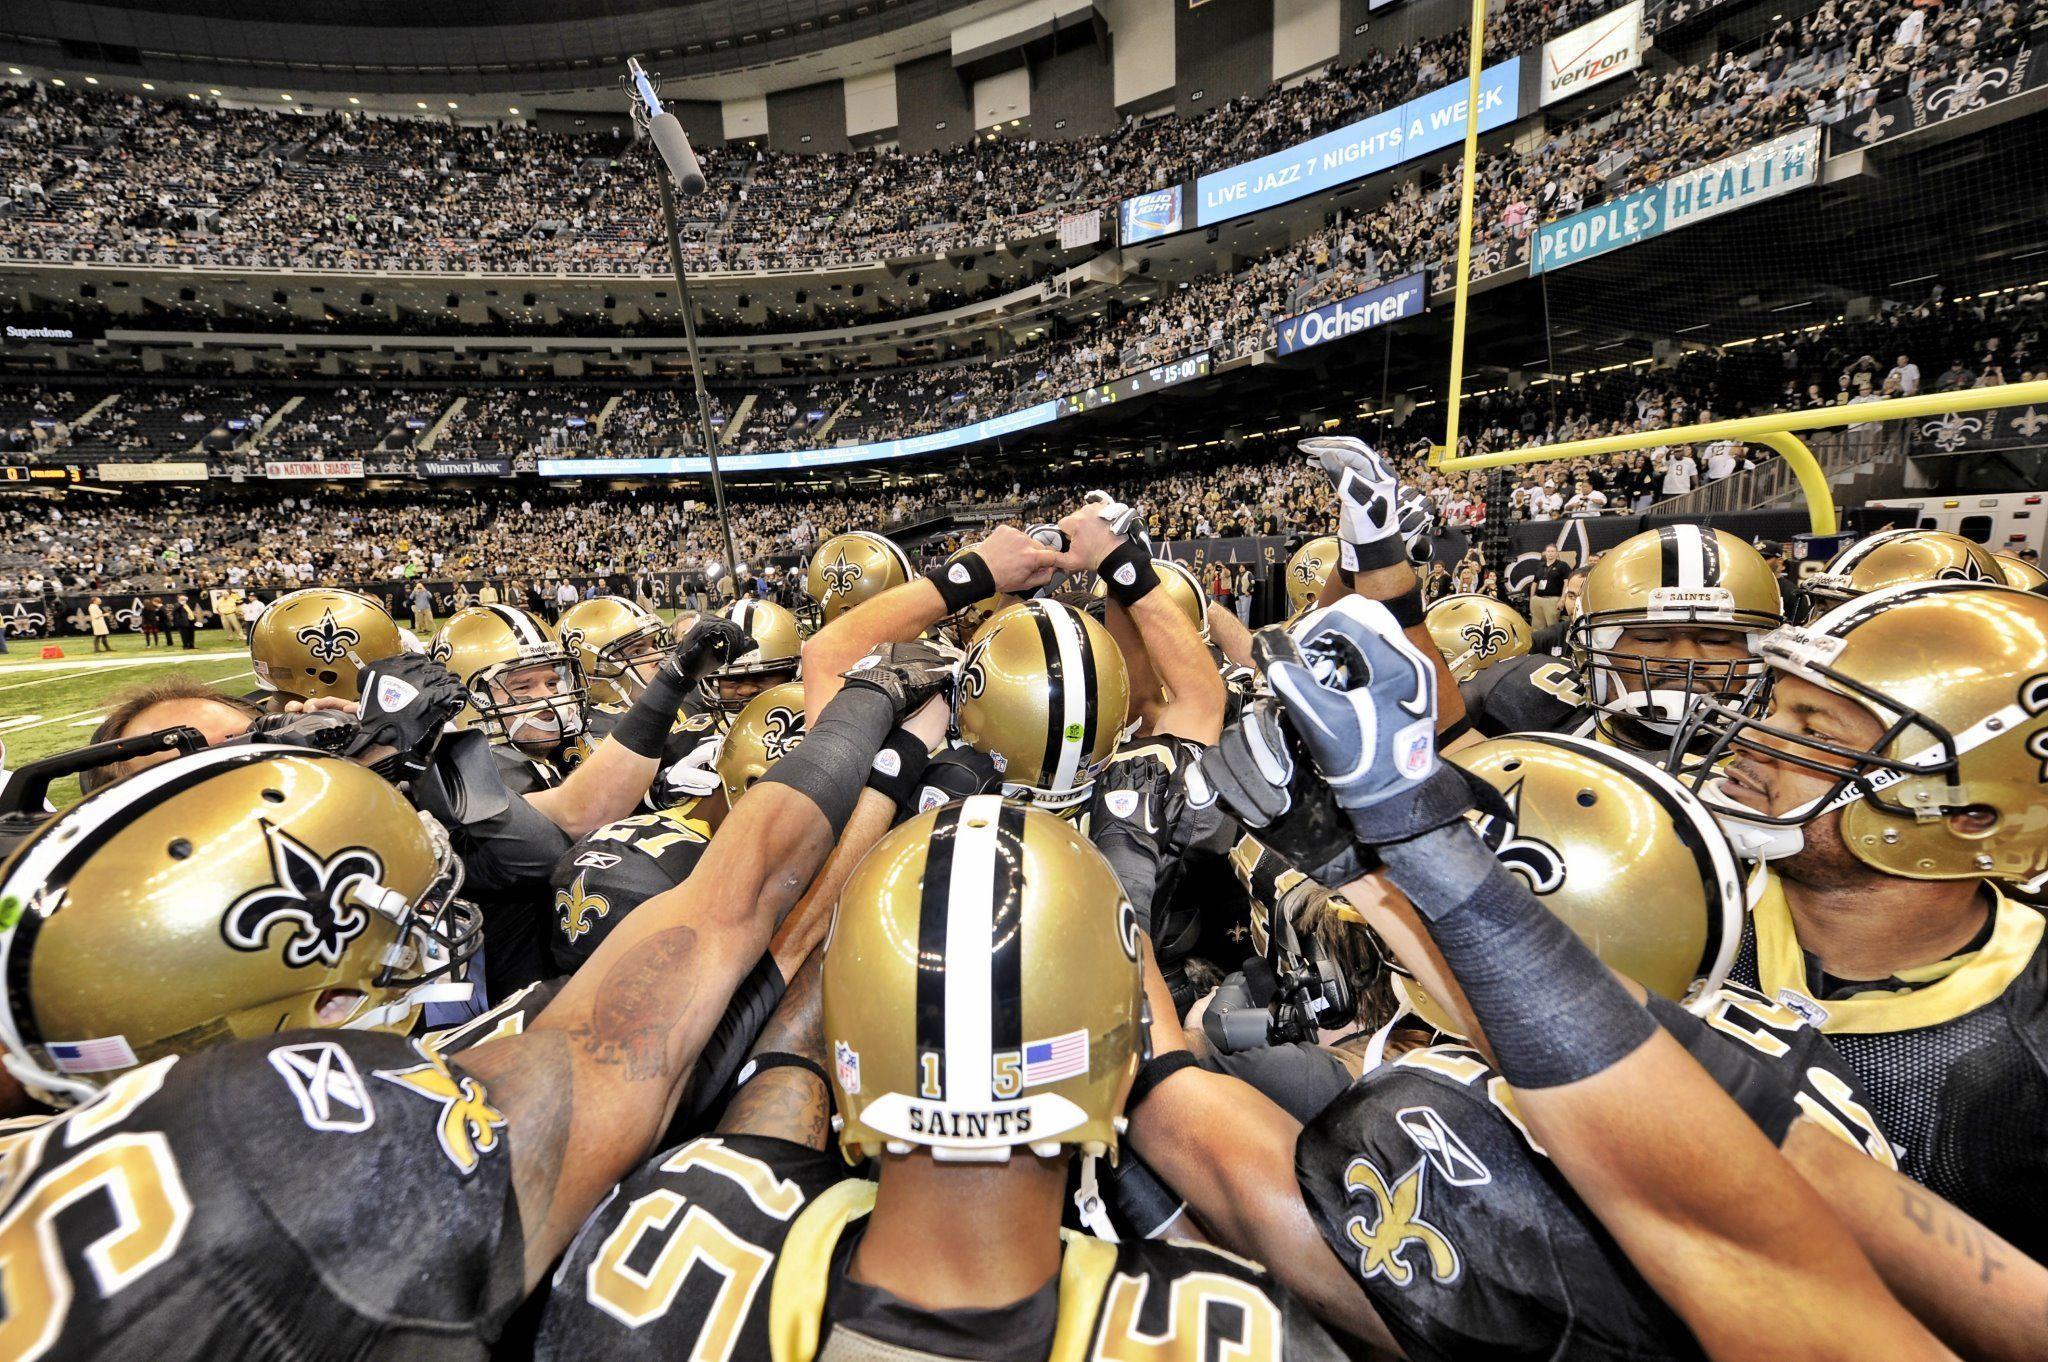 Outstanding New Orleans Saints wallpapers wallpapers